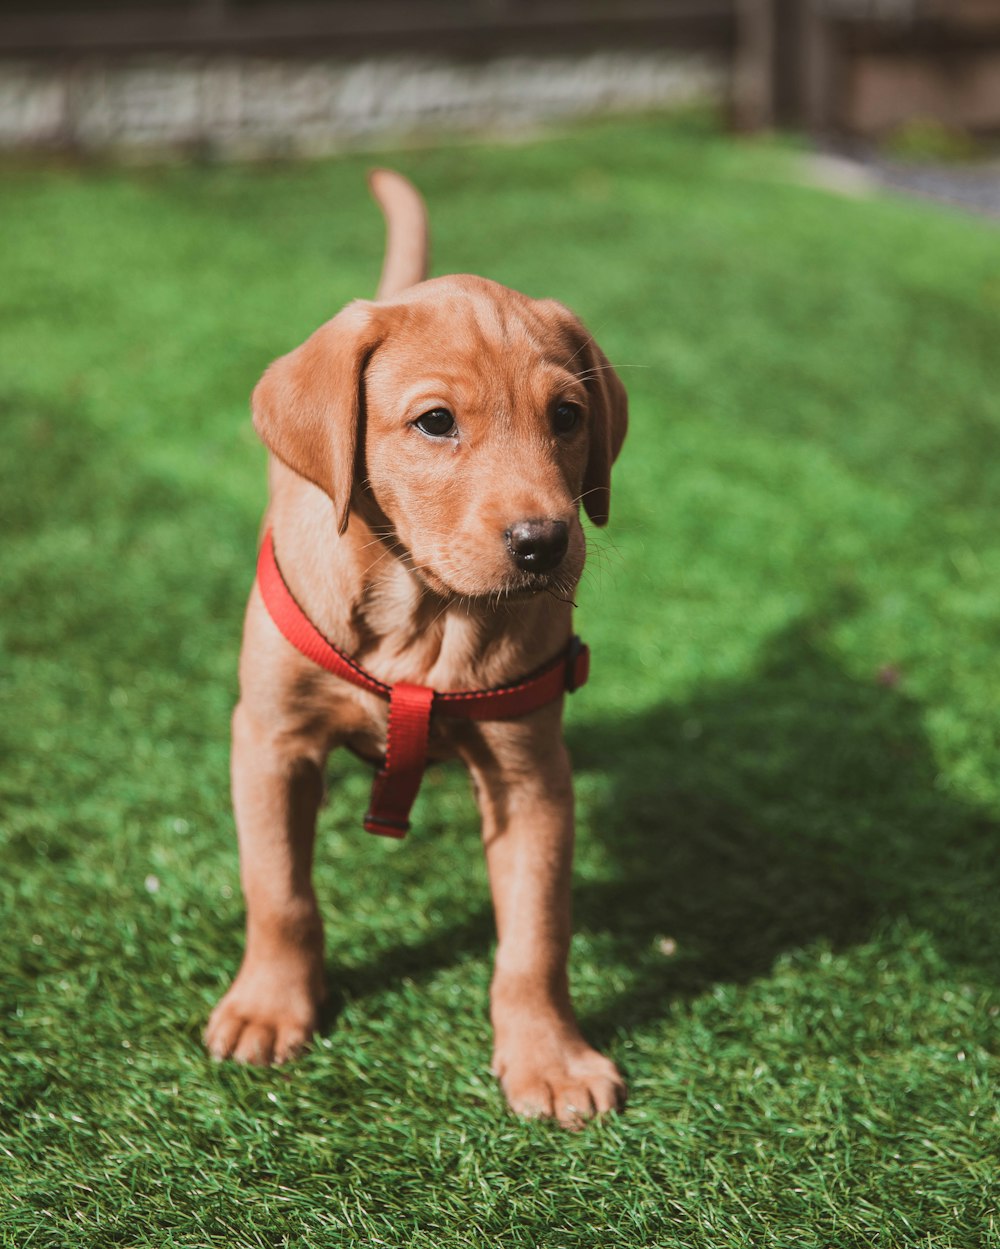 brown short coated puppy on green grass field during daytime